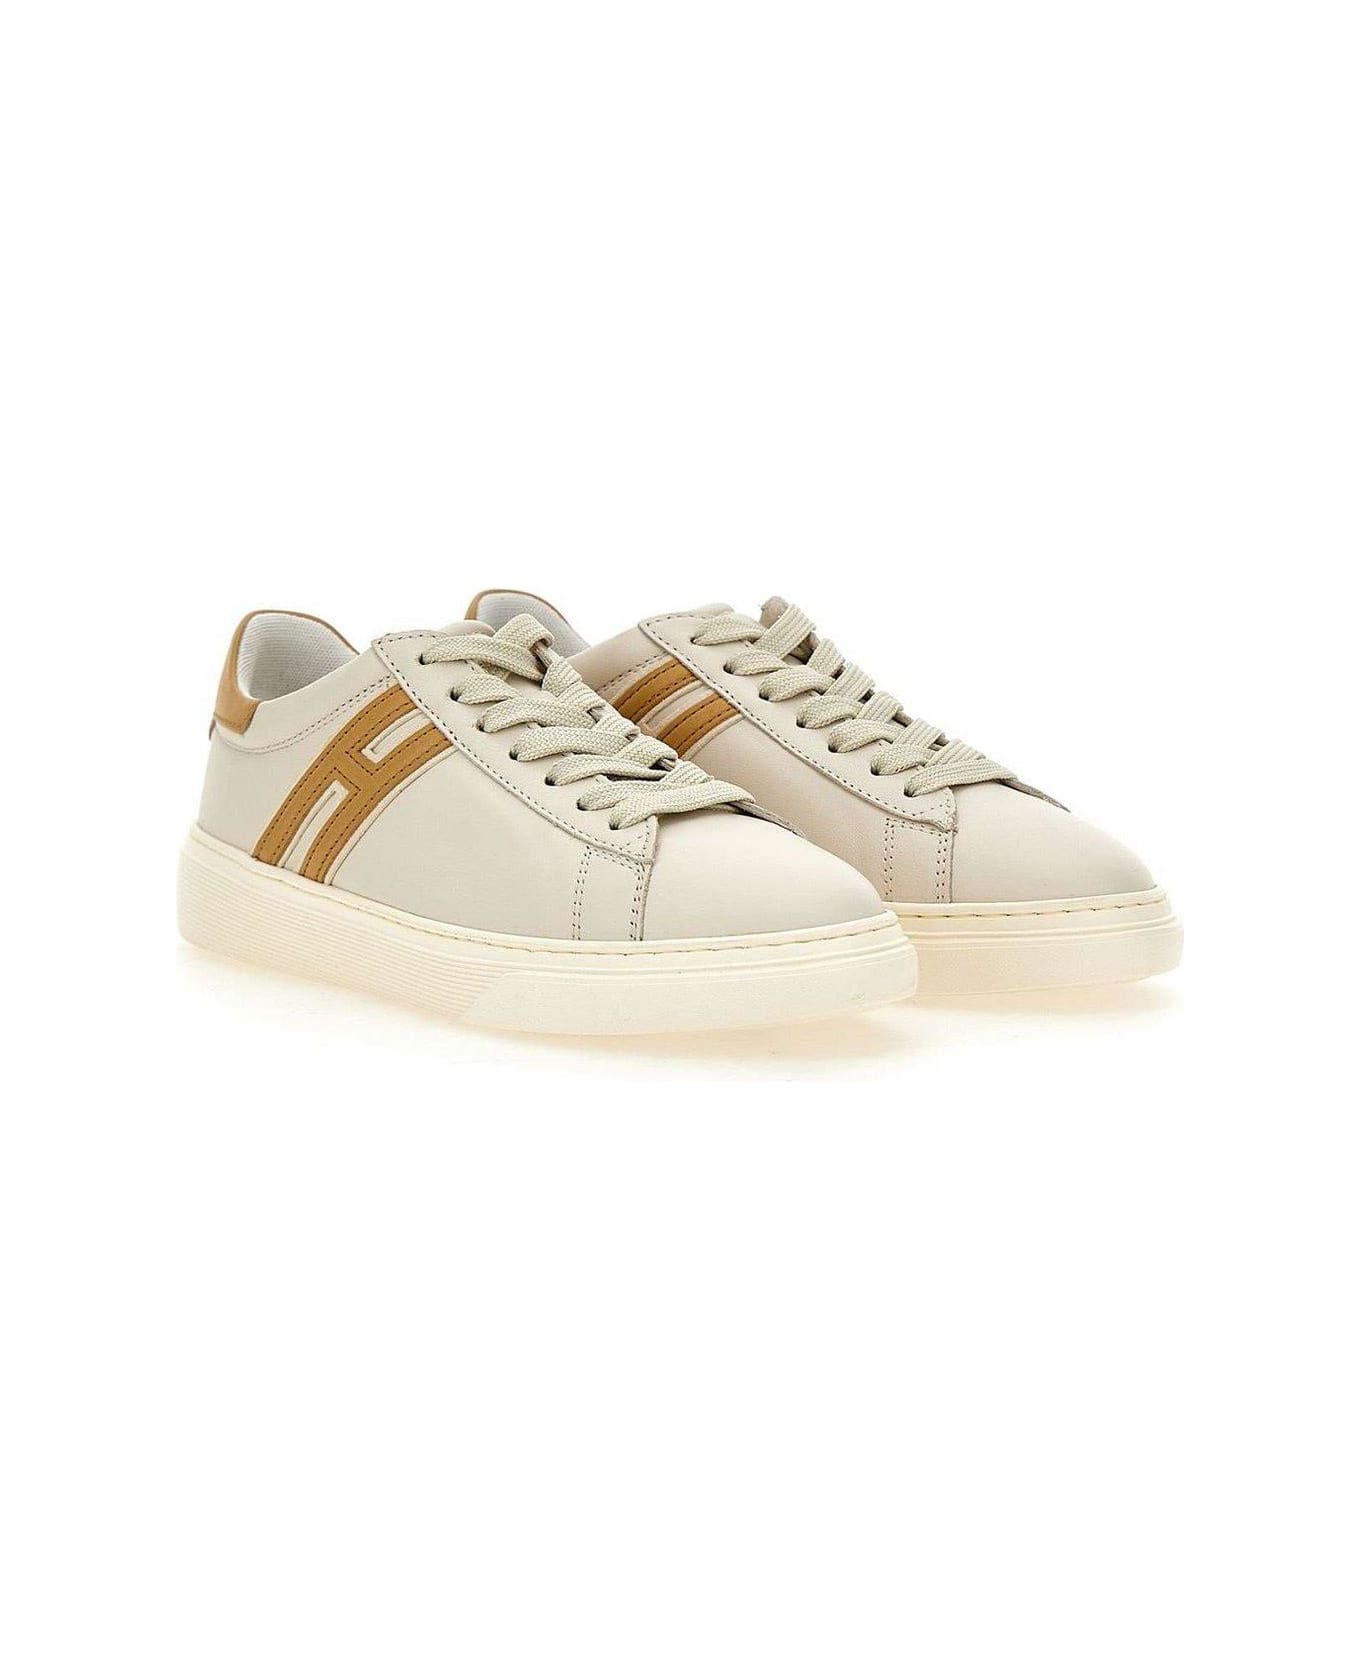 Hogan Sneakers "h365" Made Of Leather - WHITE/ Brown